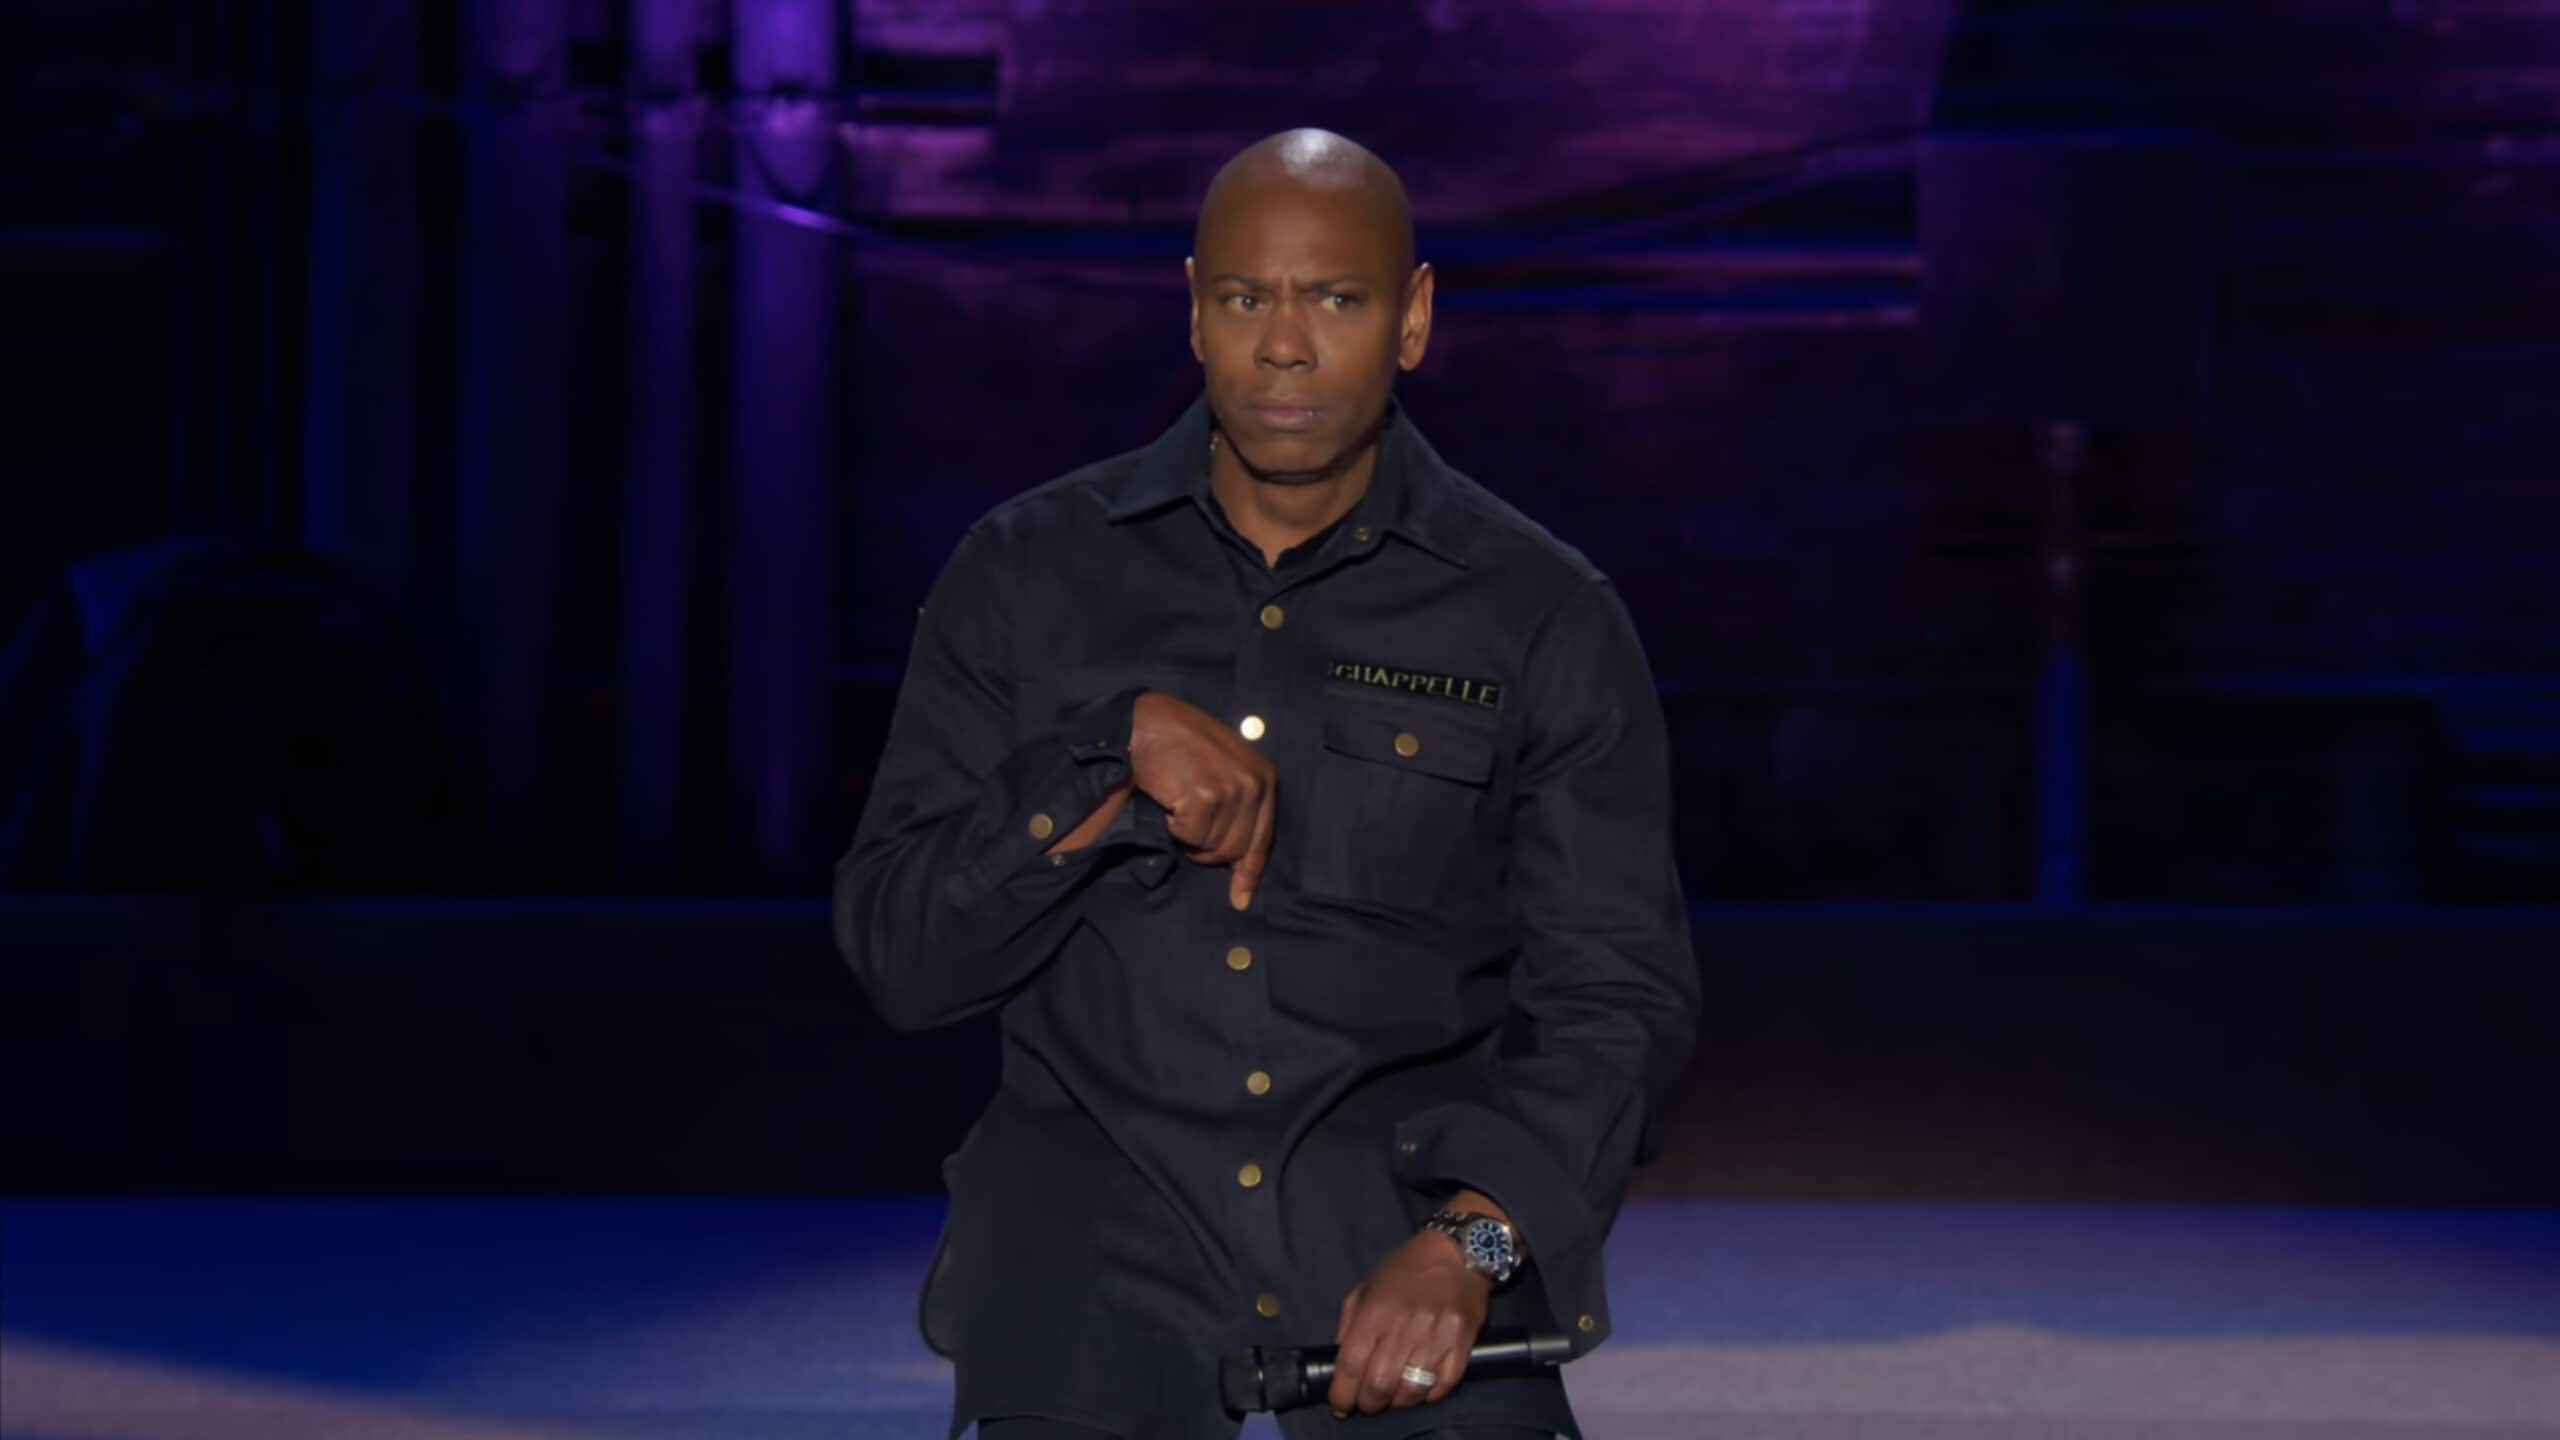 Dave Chappelle making a joke about disabled people